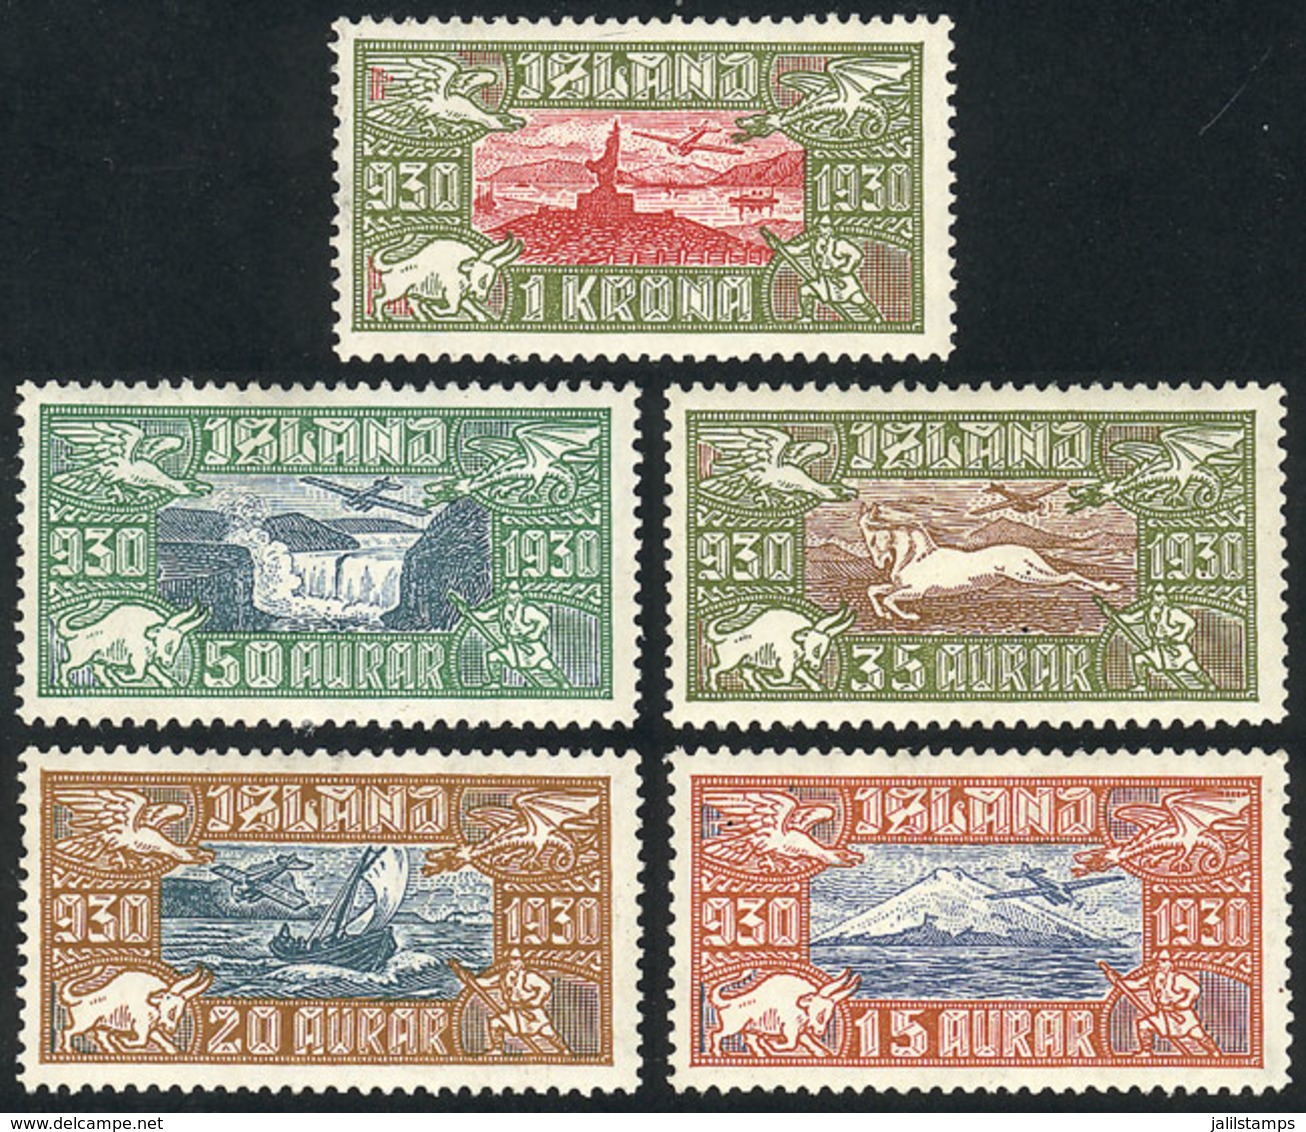 1444 ICELAND: Sc.C4/Cb, 1930 Complete Set Of 5 Values, Mint Lightly Hinged, VF Quality, Catalog Value US$290+ - Luftpost